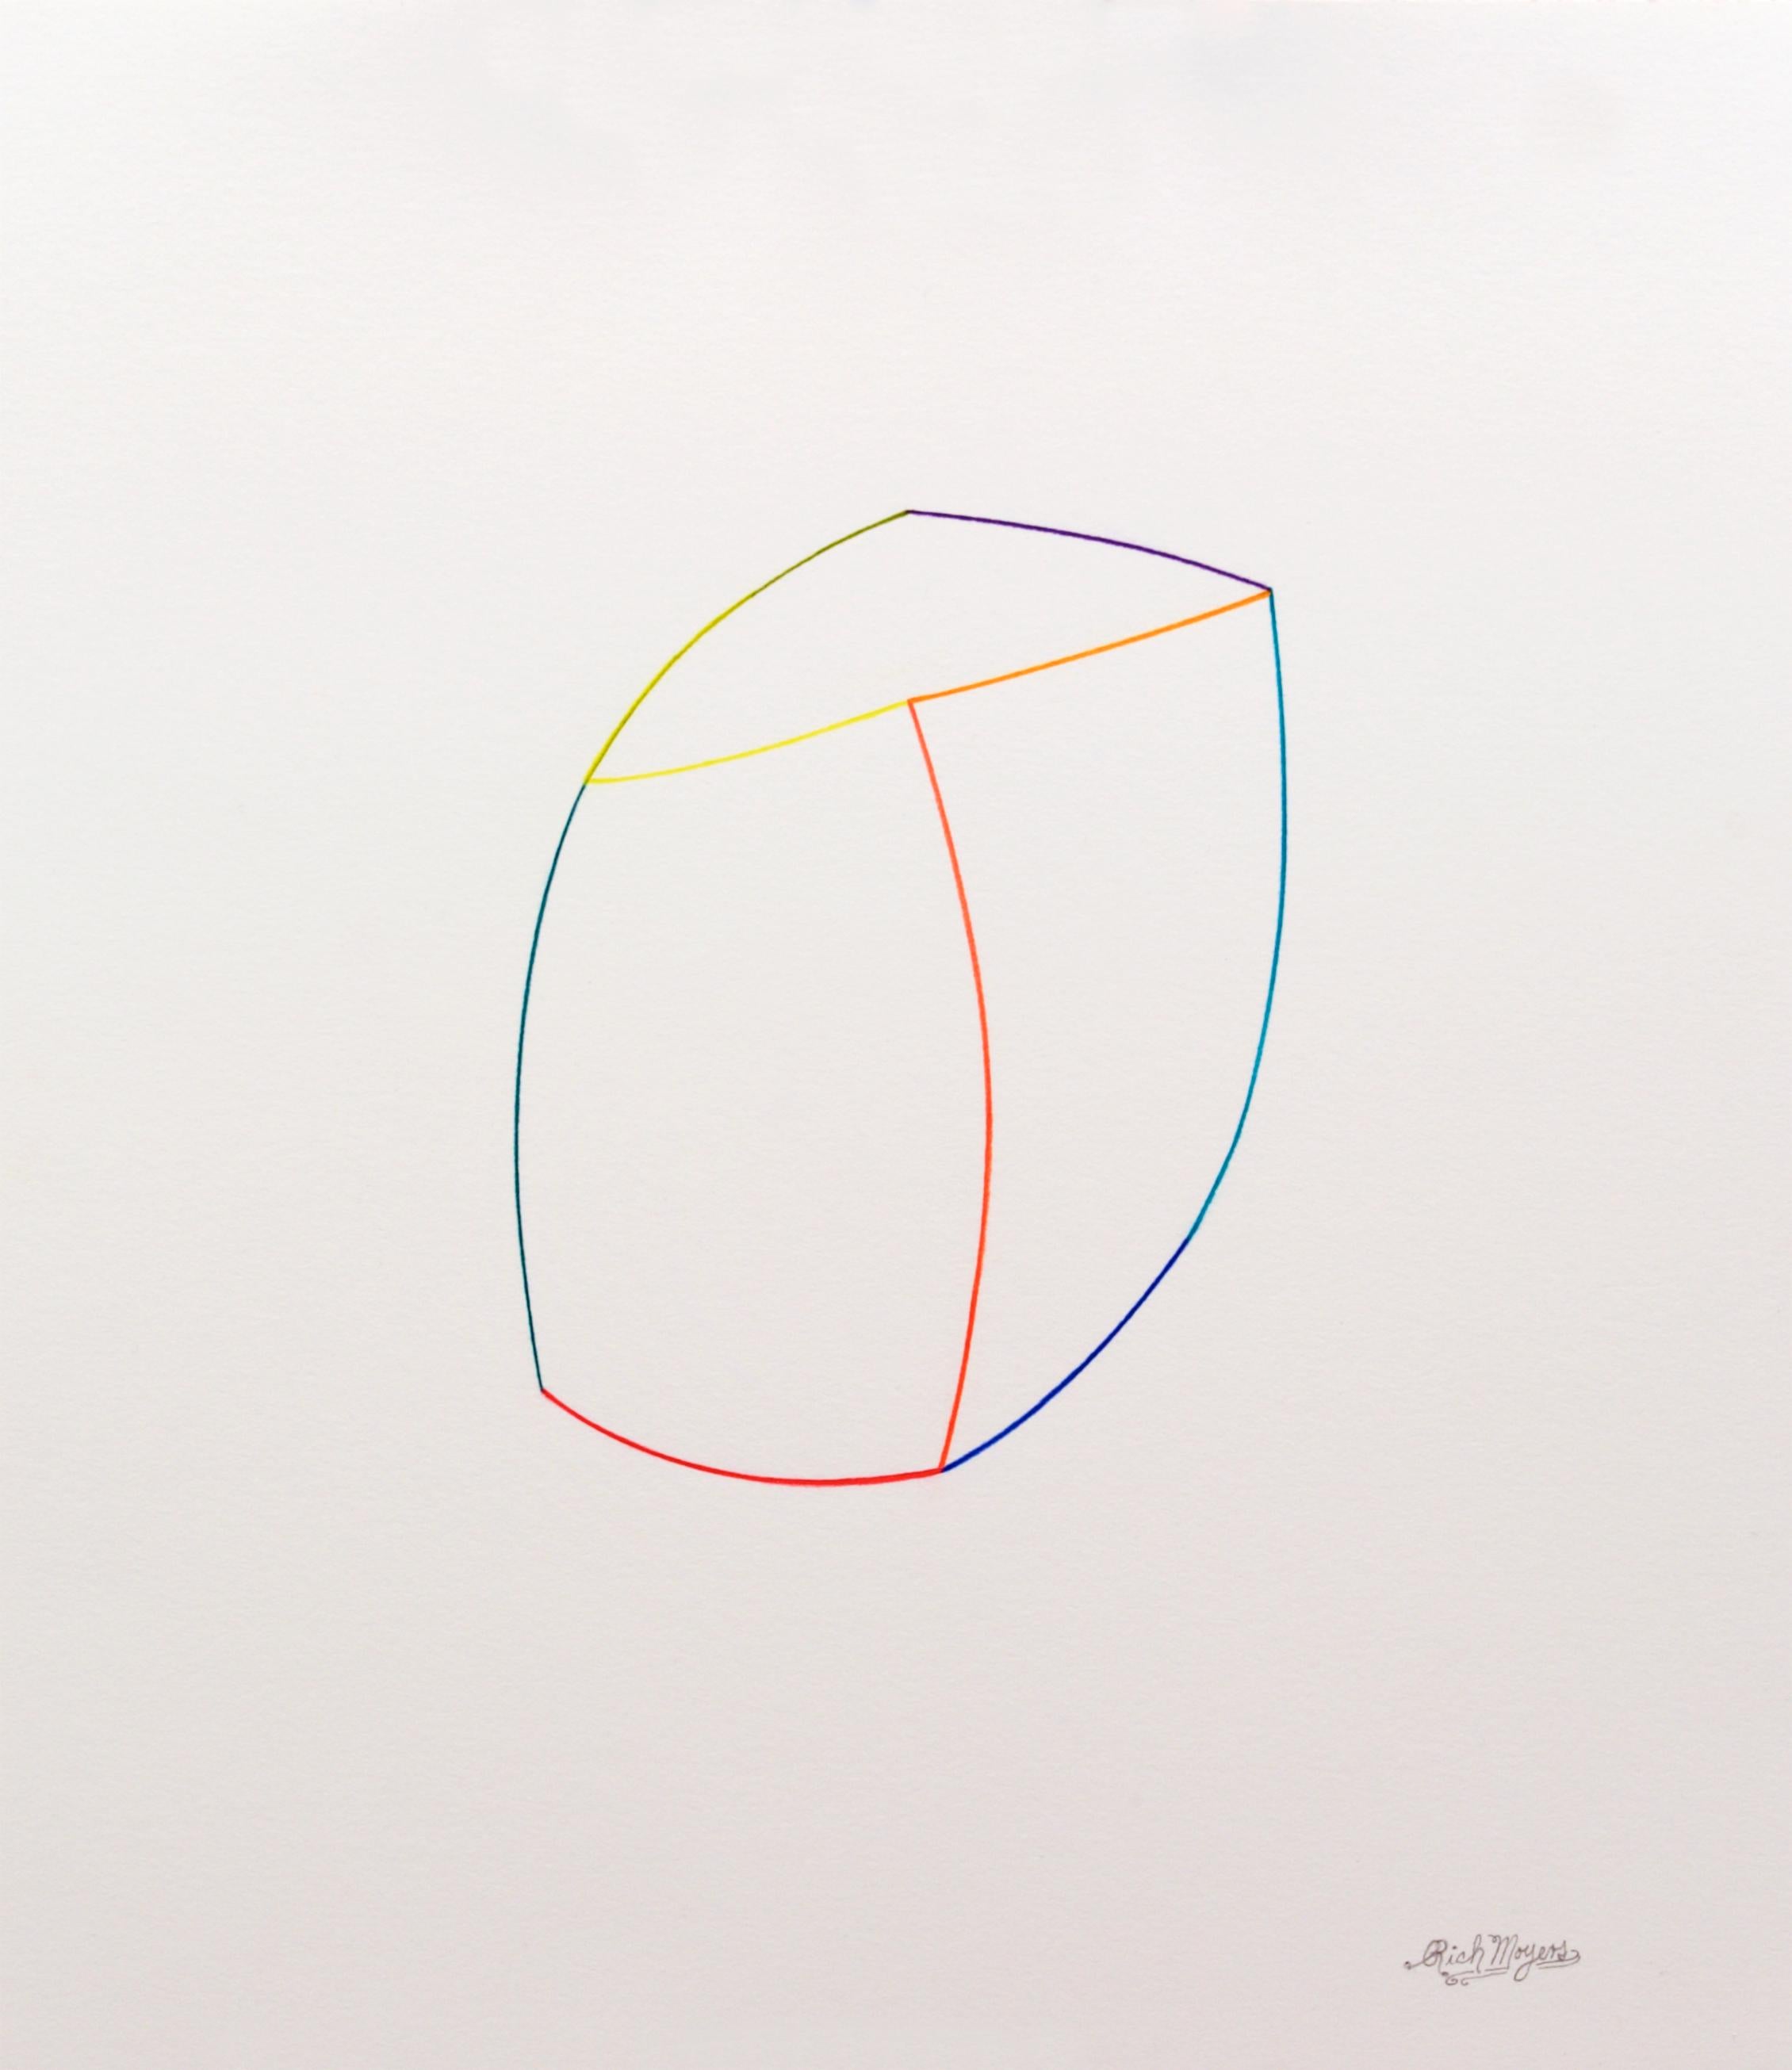 UNTITLED #2 - Modern / Minimal Line Drawing, Drawing, Pencil/Colored Pencil on W - Art by Rich Moyers